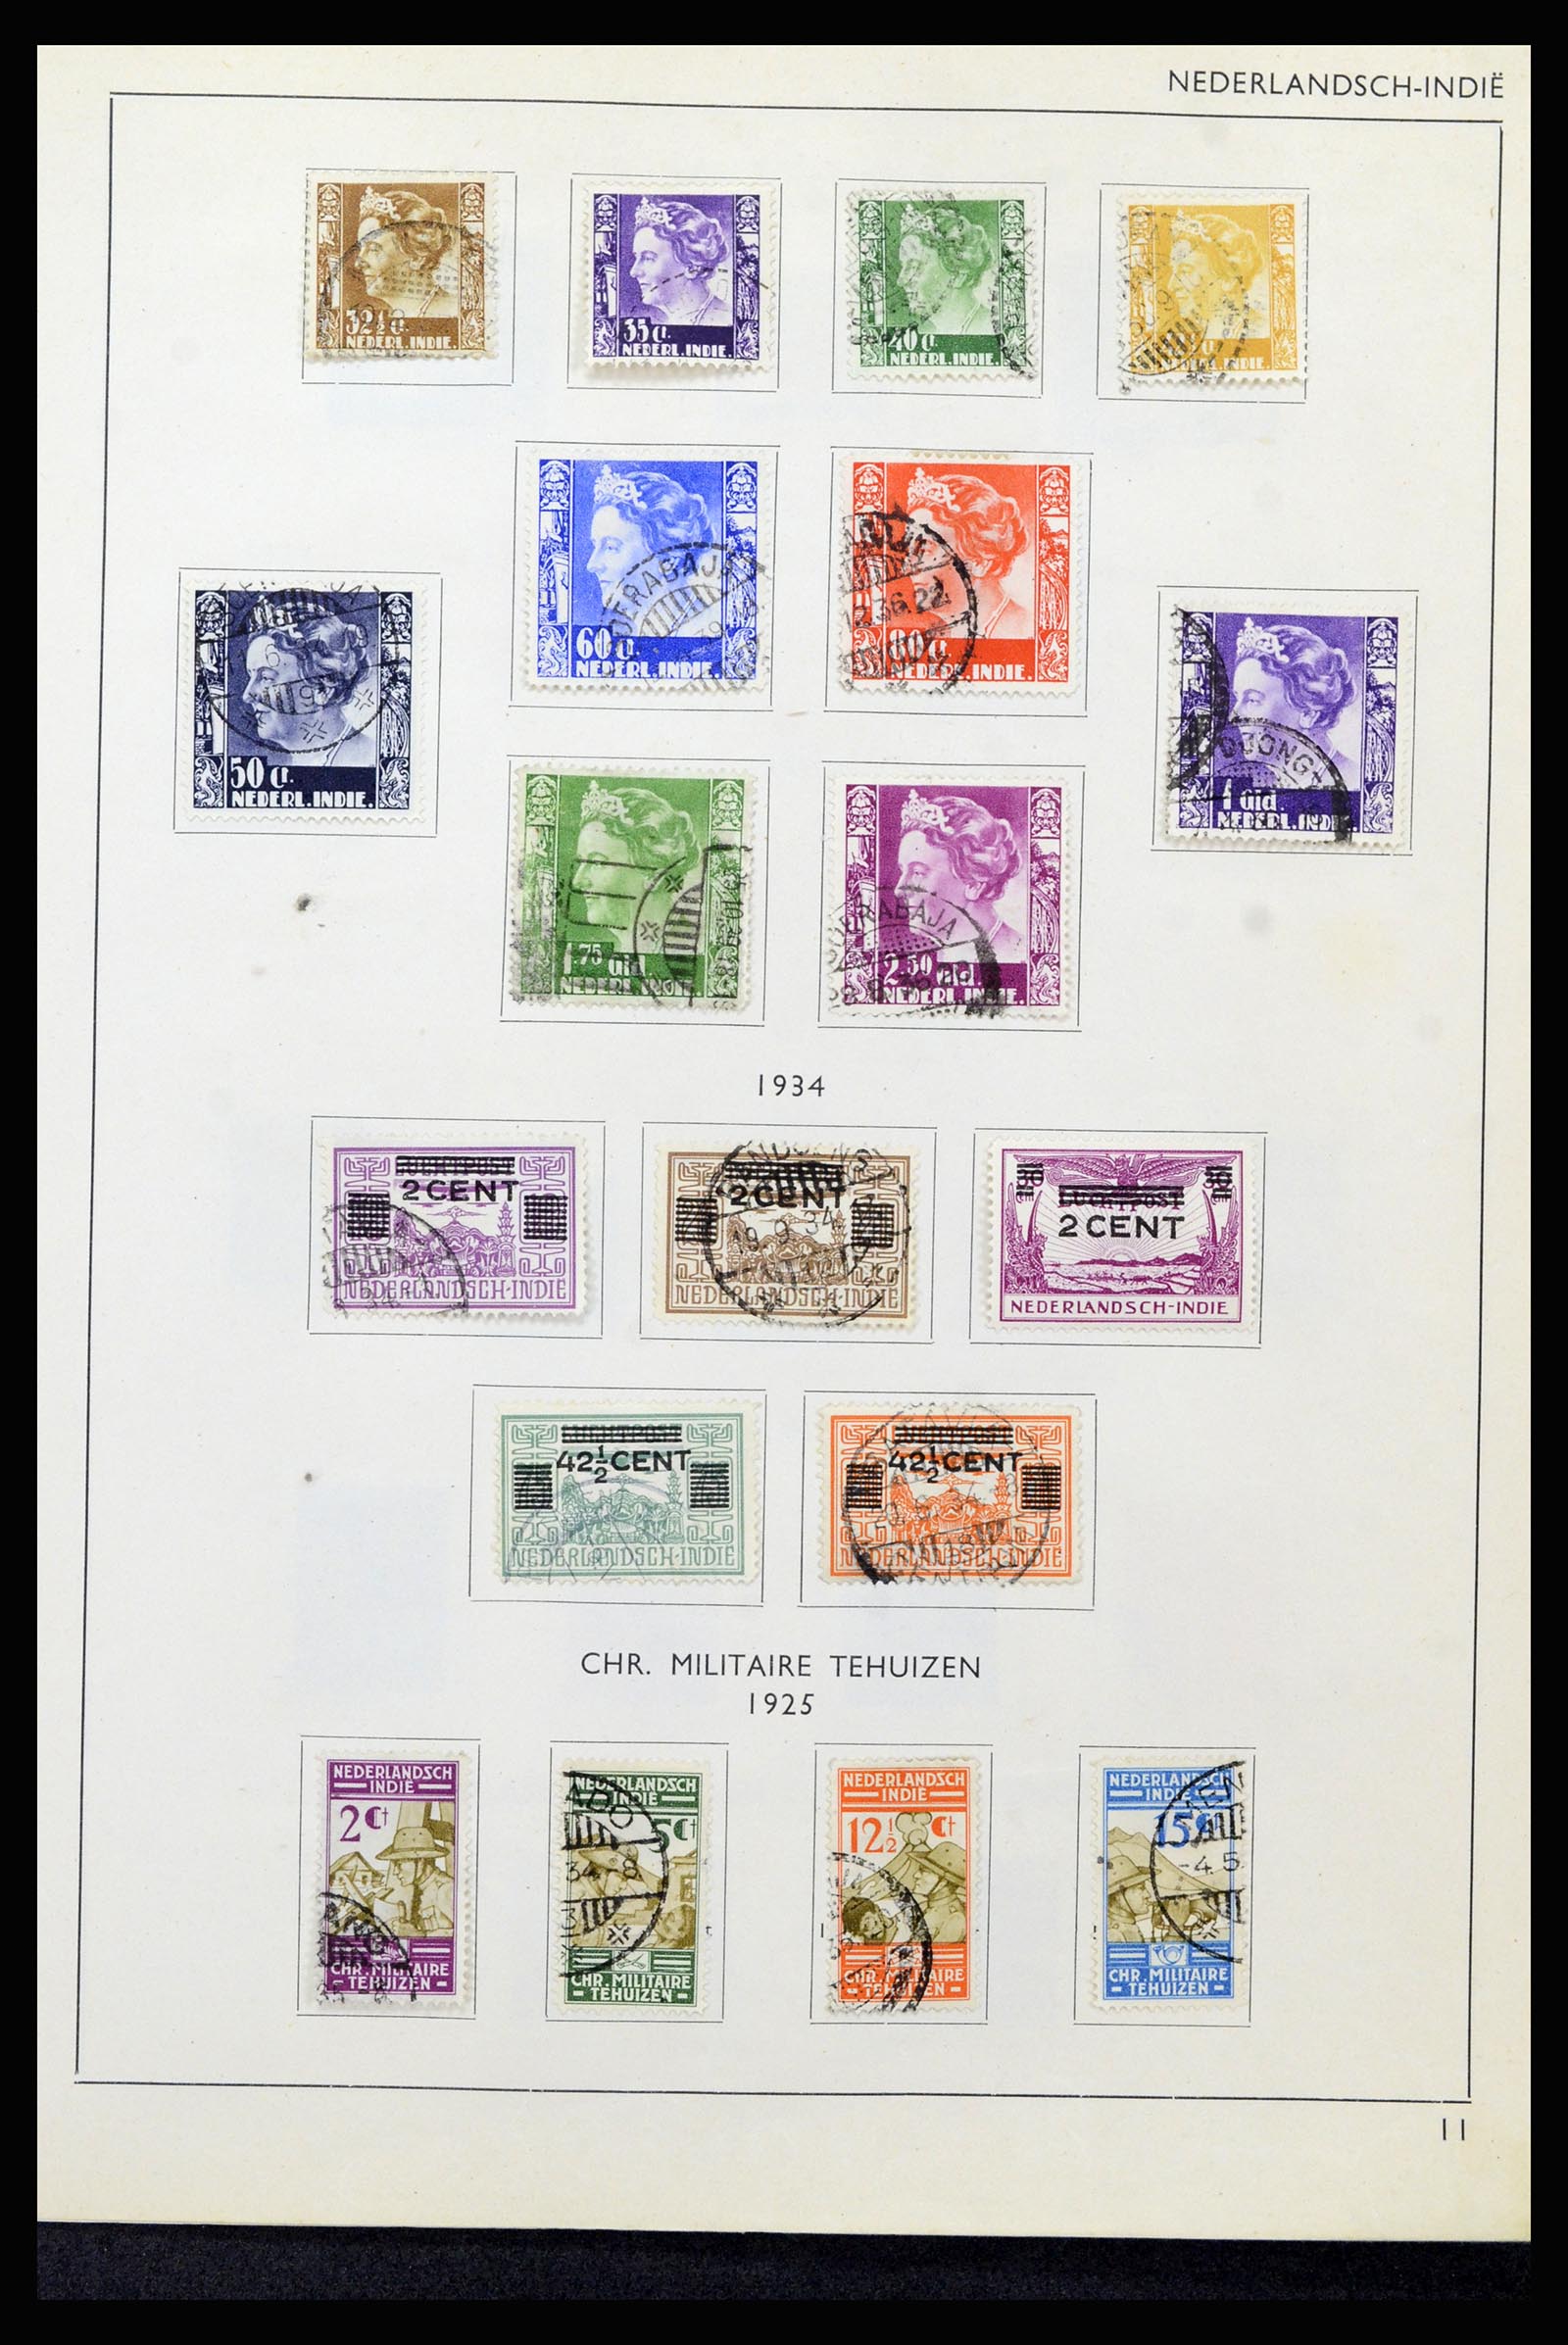 37217 011 - Stamp collection 37217 Dutch territories 1864-1975.